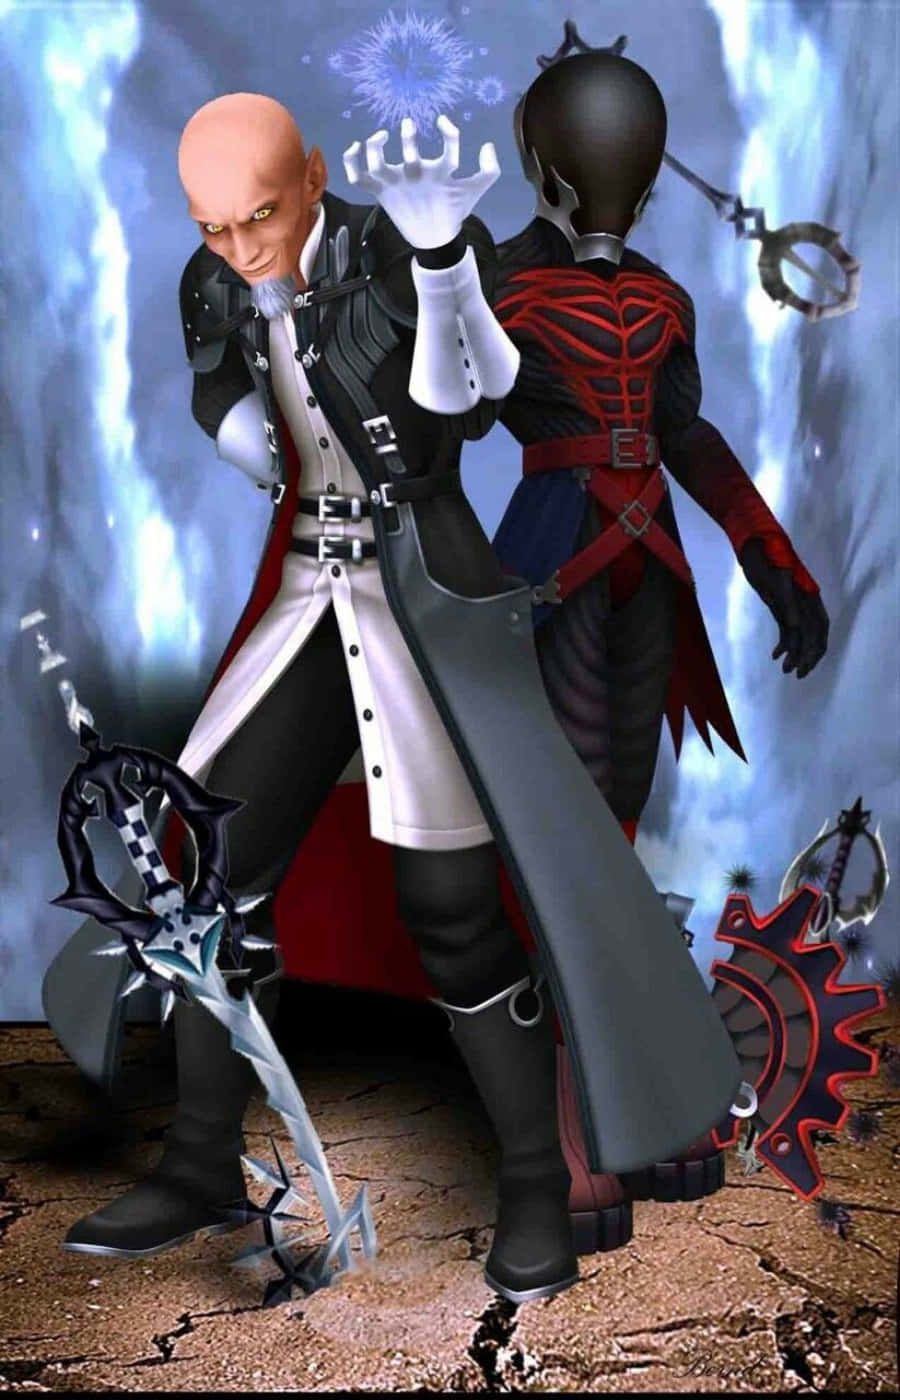 Caption: The Powerful Xehanort from Kingdom Hearts Wallpaper